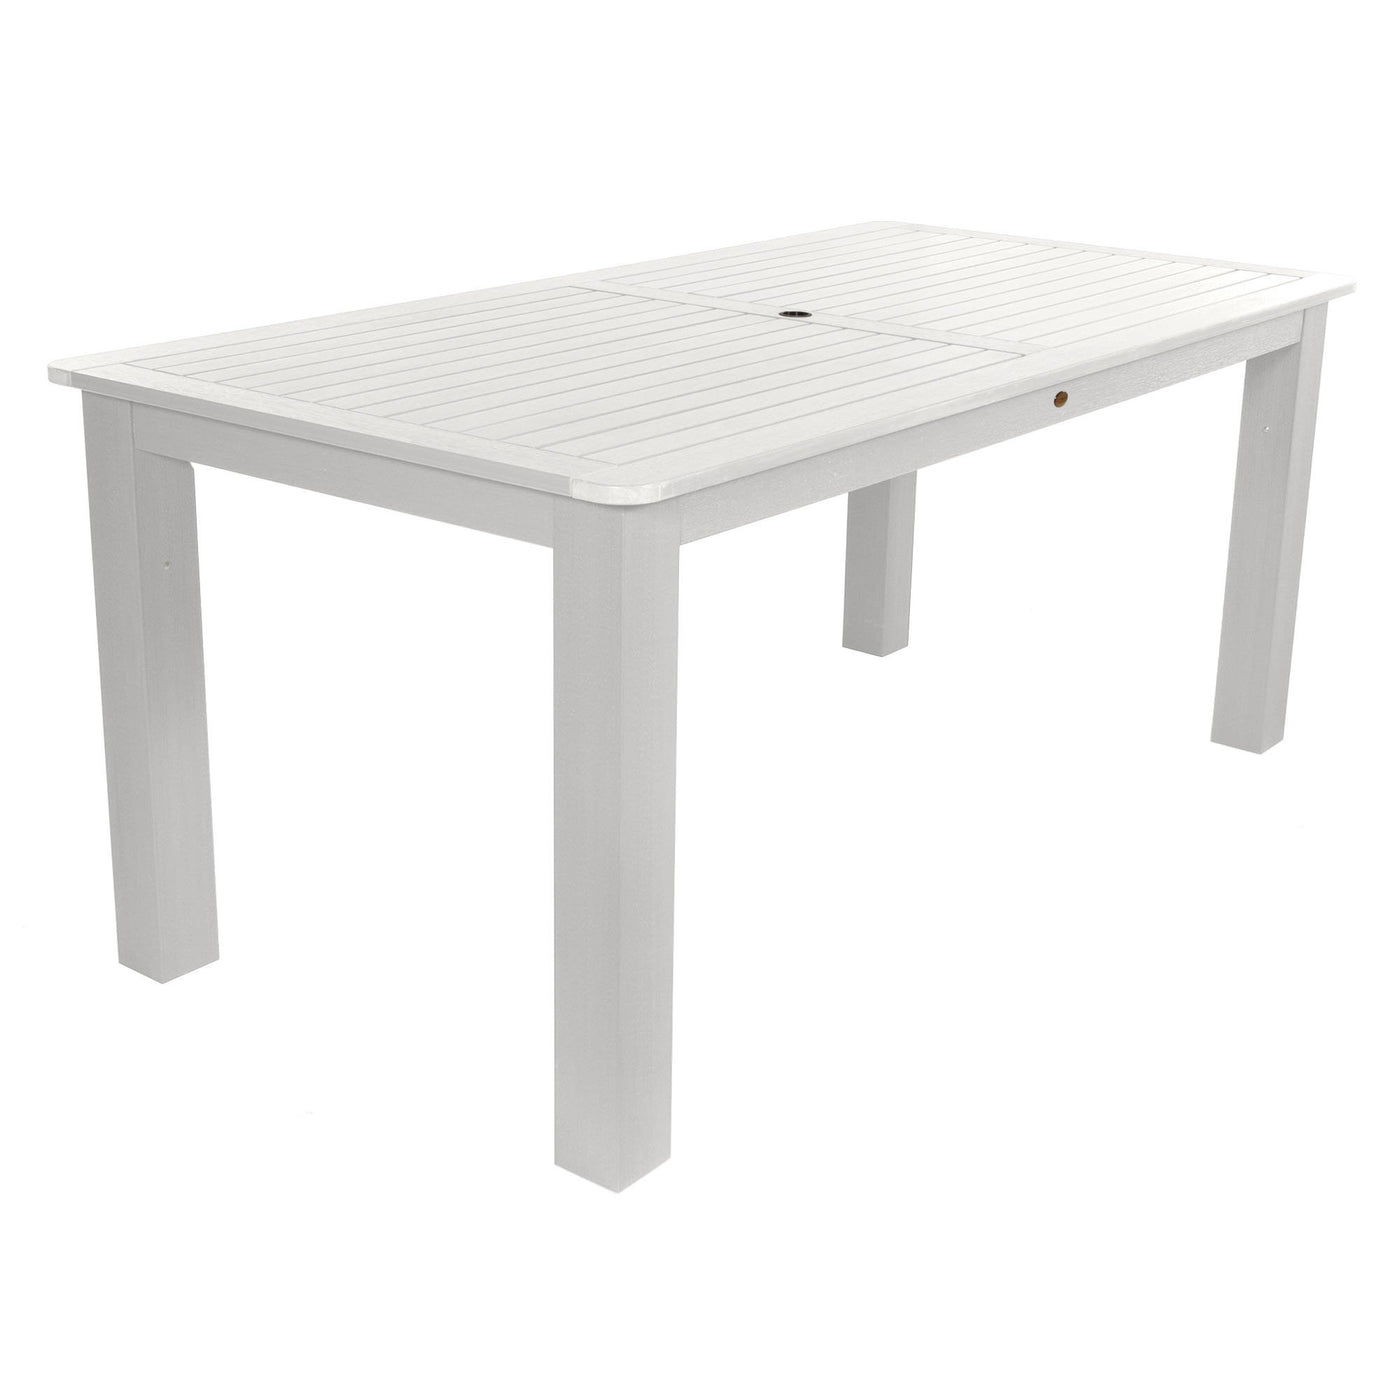 Rectangular 42in x 84in Oversized Dining Table - Counter Height Dining Highwood USA White 